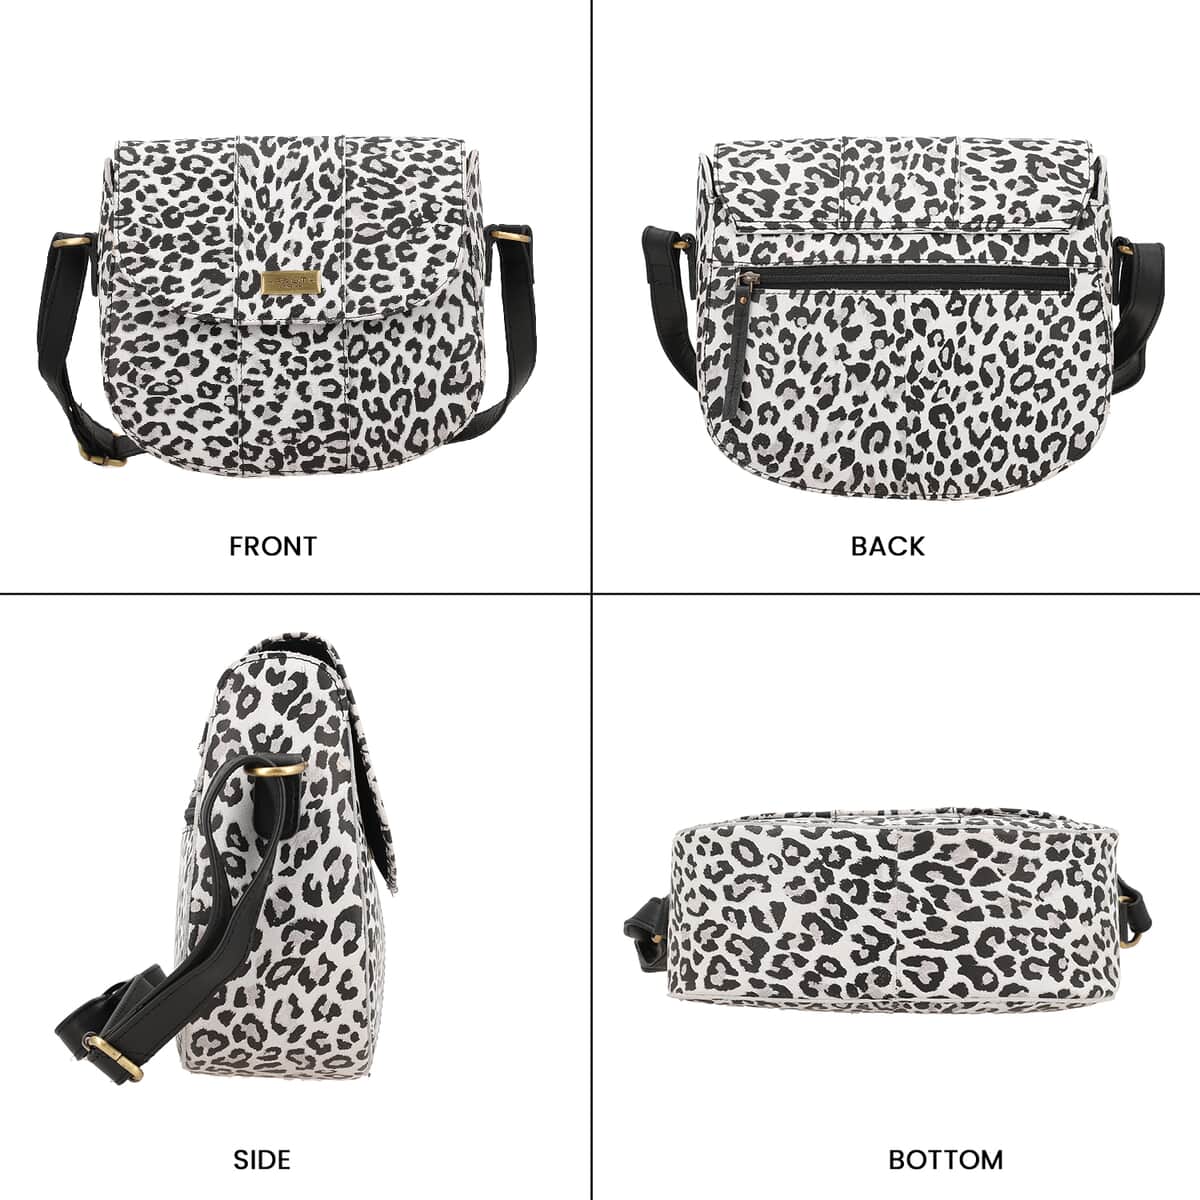 Assots London Black Leopard Print Genuine Leather Crossbody Sling Bag For Ladies With Adjustable Strap and Button Closure (8.66X8.07X3.13) image number 3